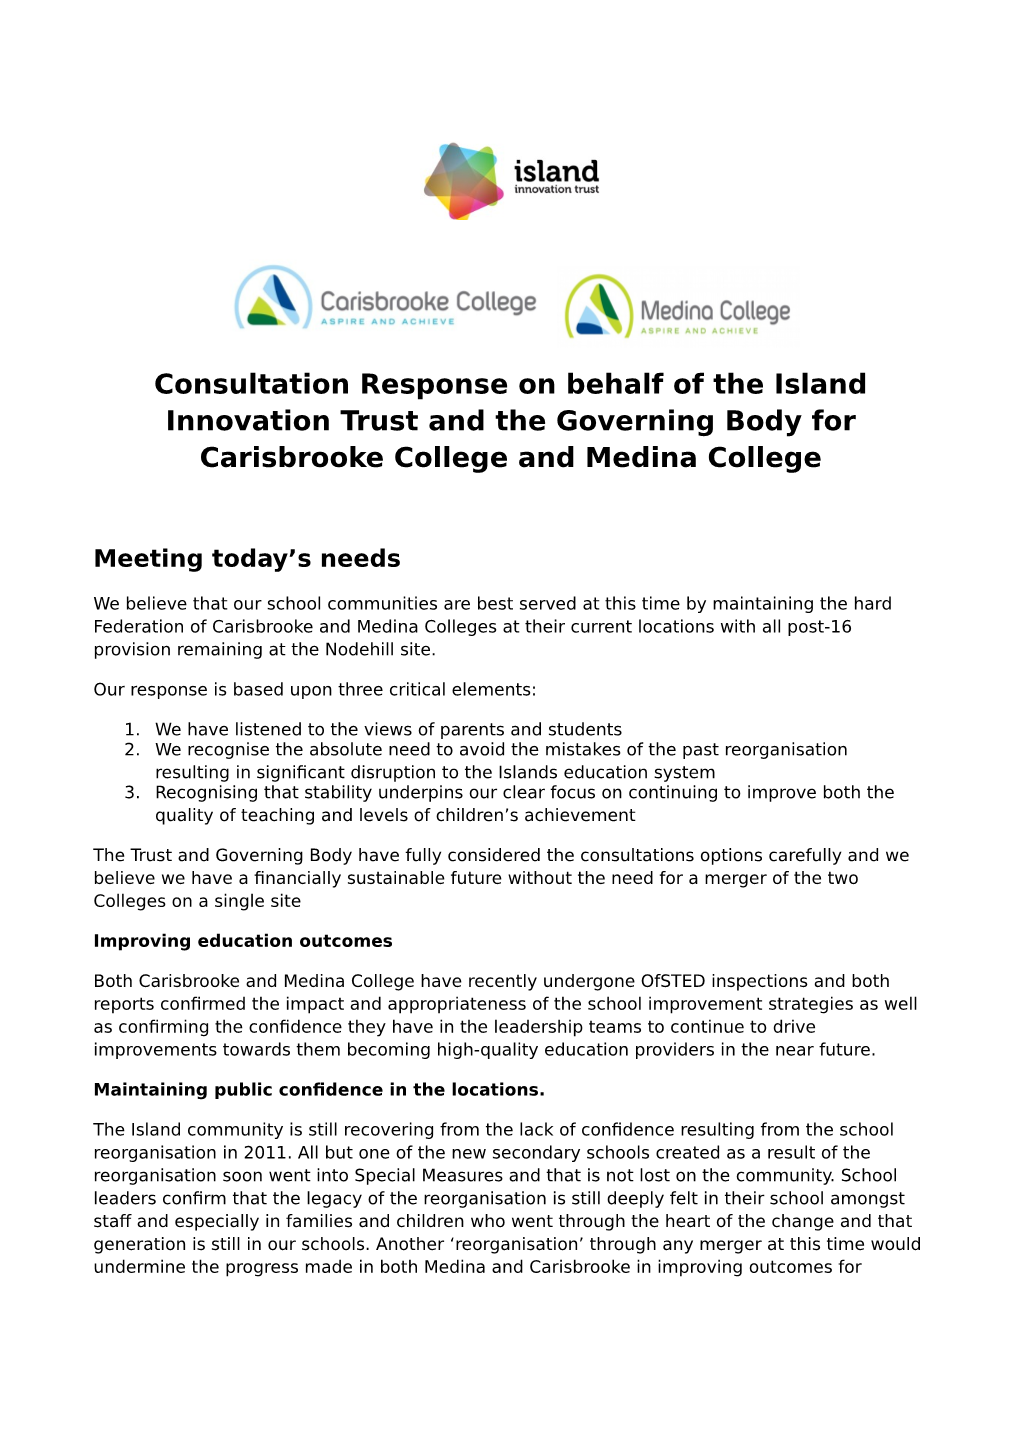 Consultation Response on Behalf of the Island Innovation Trust and the Governing Body for Carisbrooke College and Medina College